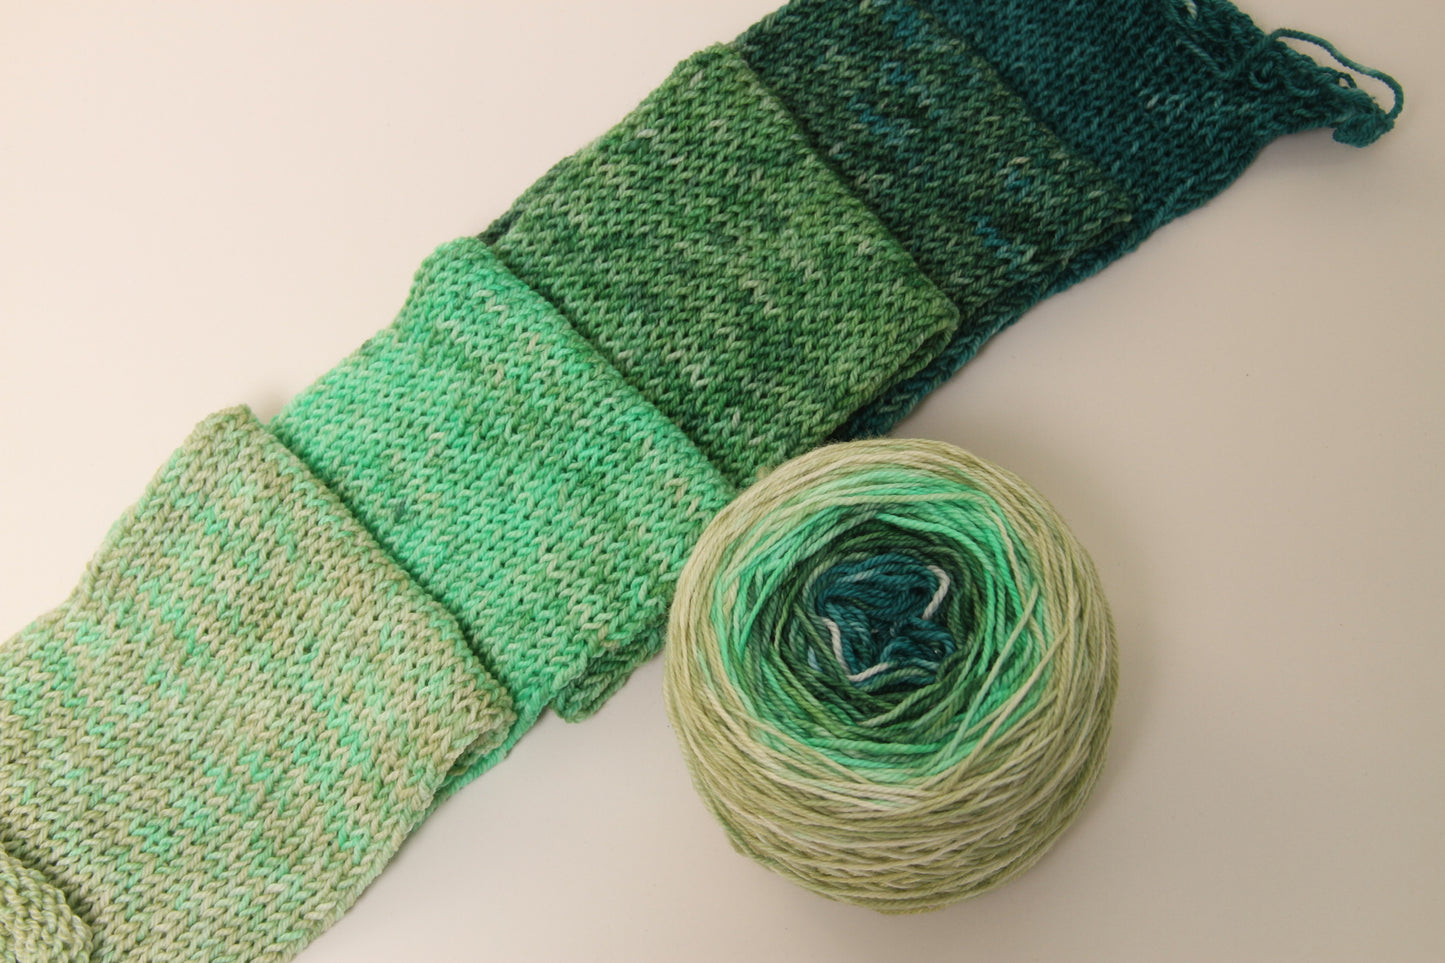 Fields of Green | Merino/Cashmere Blend | Gradient Fade | Ready to ship